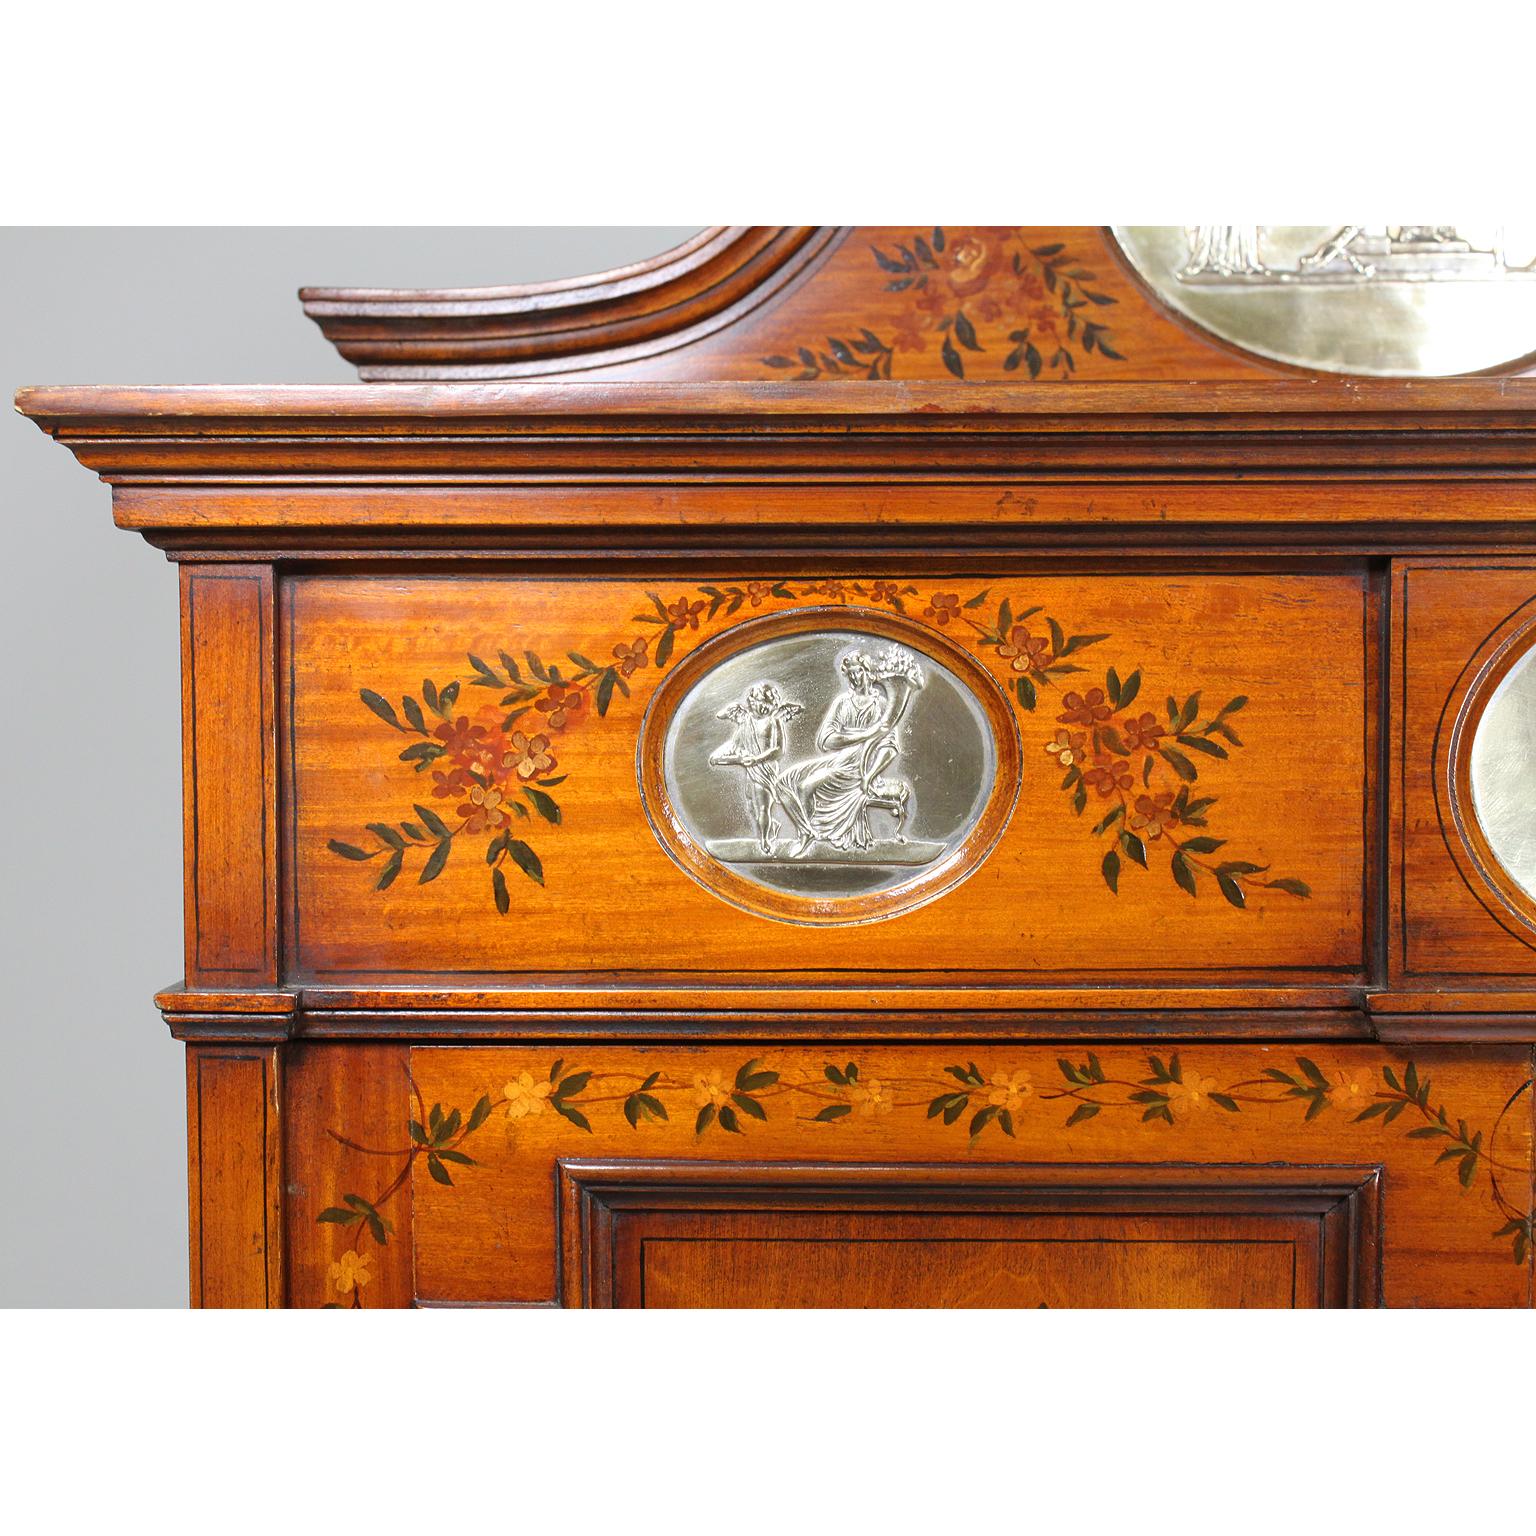 Early 20th Century English 19th Century Edwardian Style Painted Satinwood & Silver-Mounted Cabinet For Sale